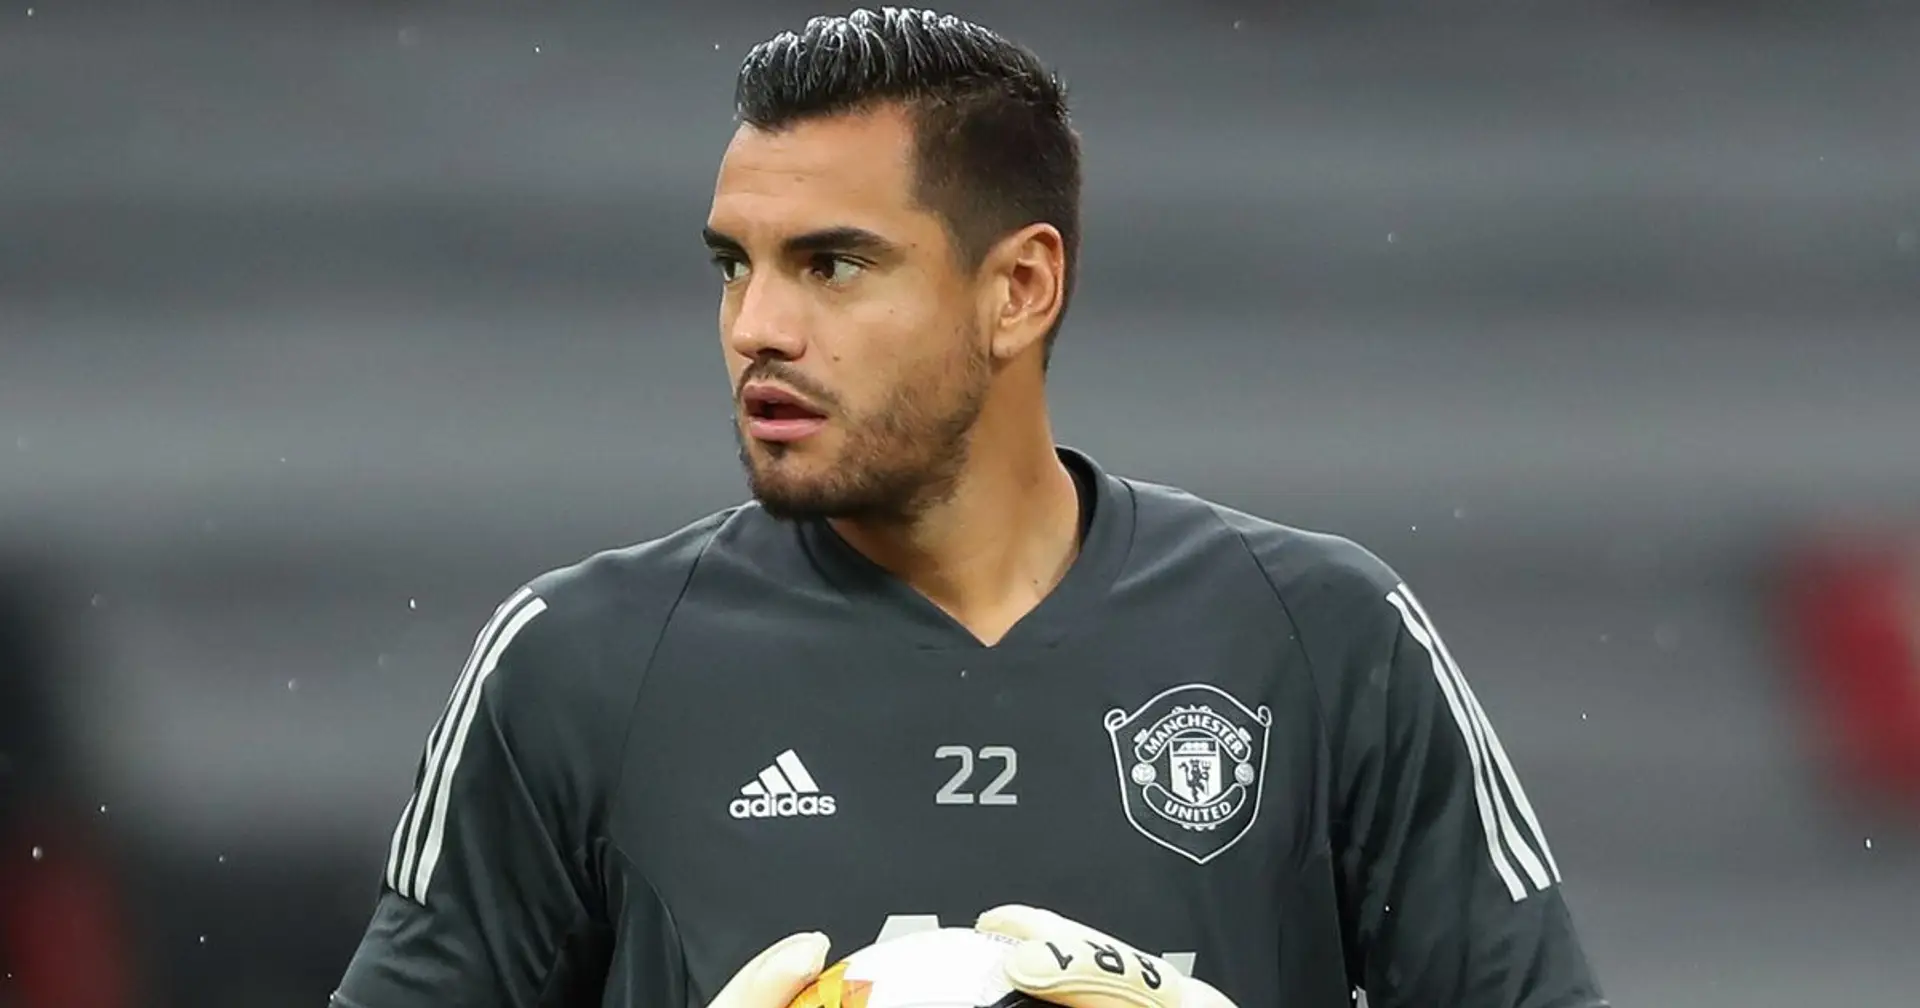 The Athletic: Chelsea want Romero, Argentine wants out after Europa League snub